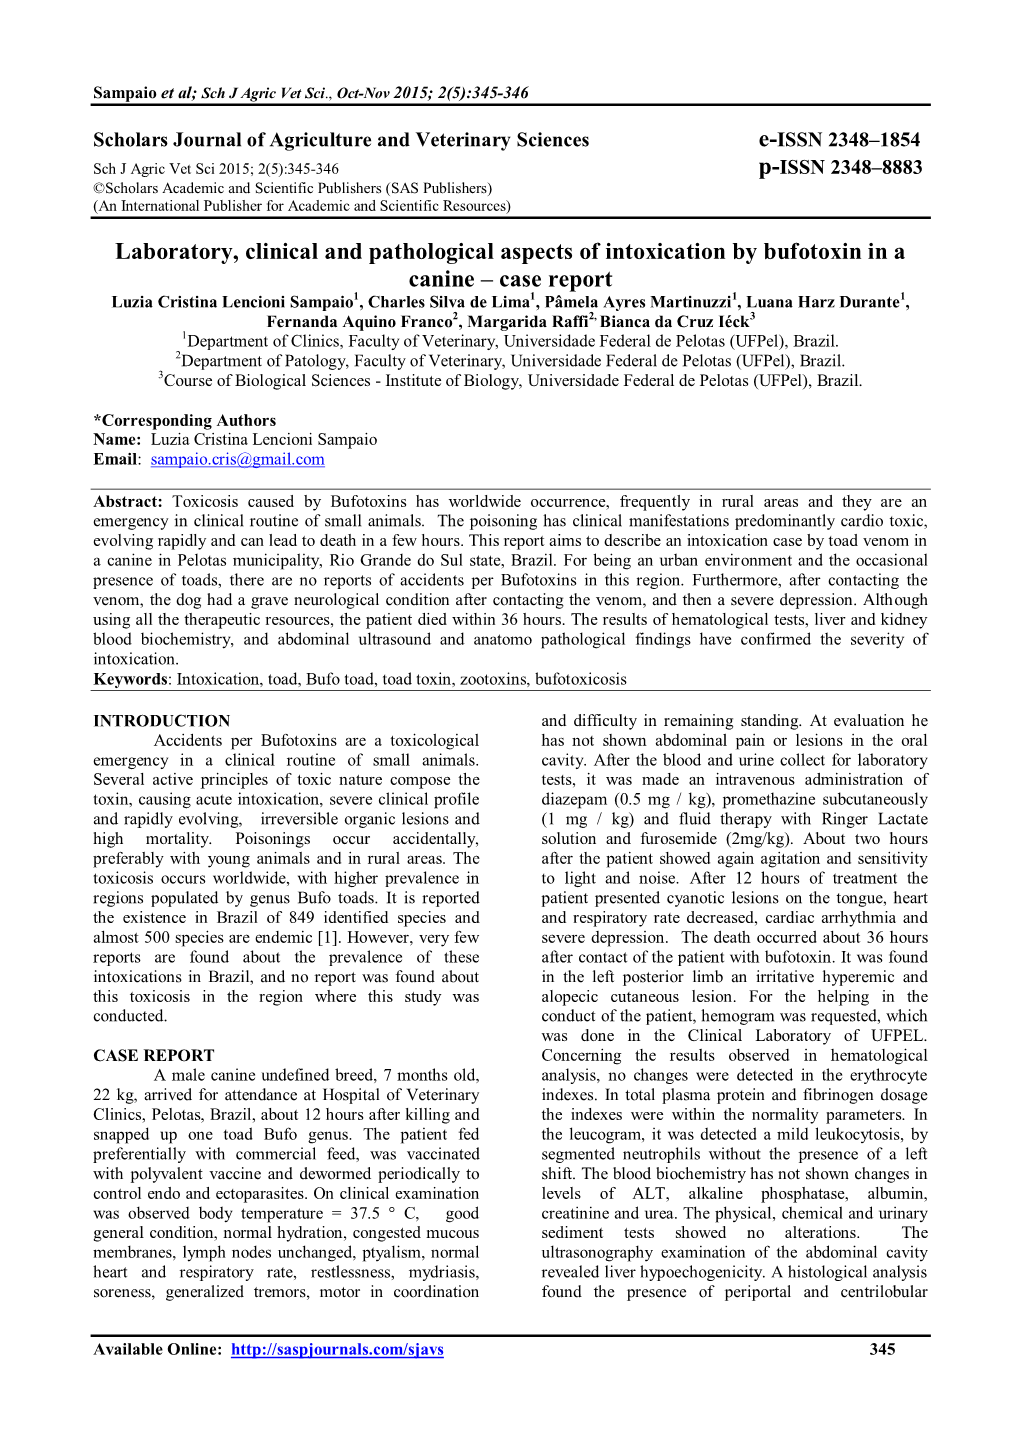 Laboratory, Clinical and Pathological Aspects of Intoxication by Bufotoxin